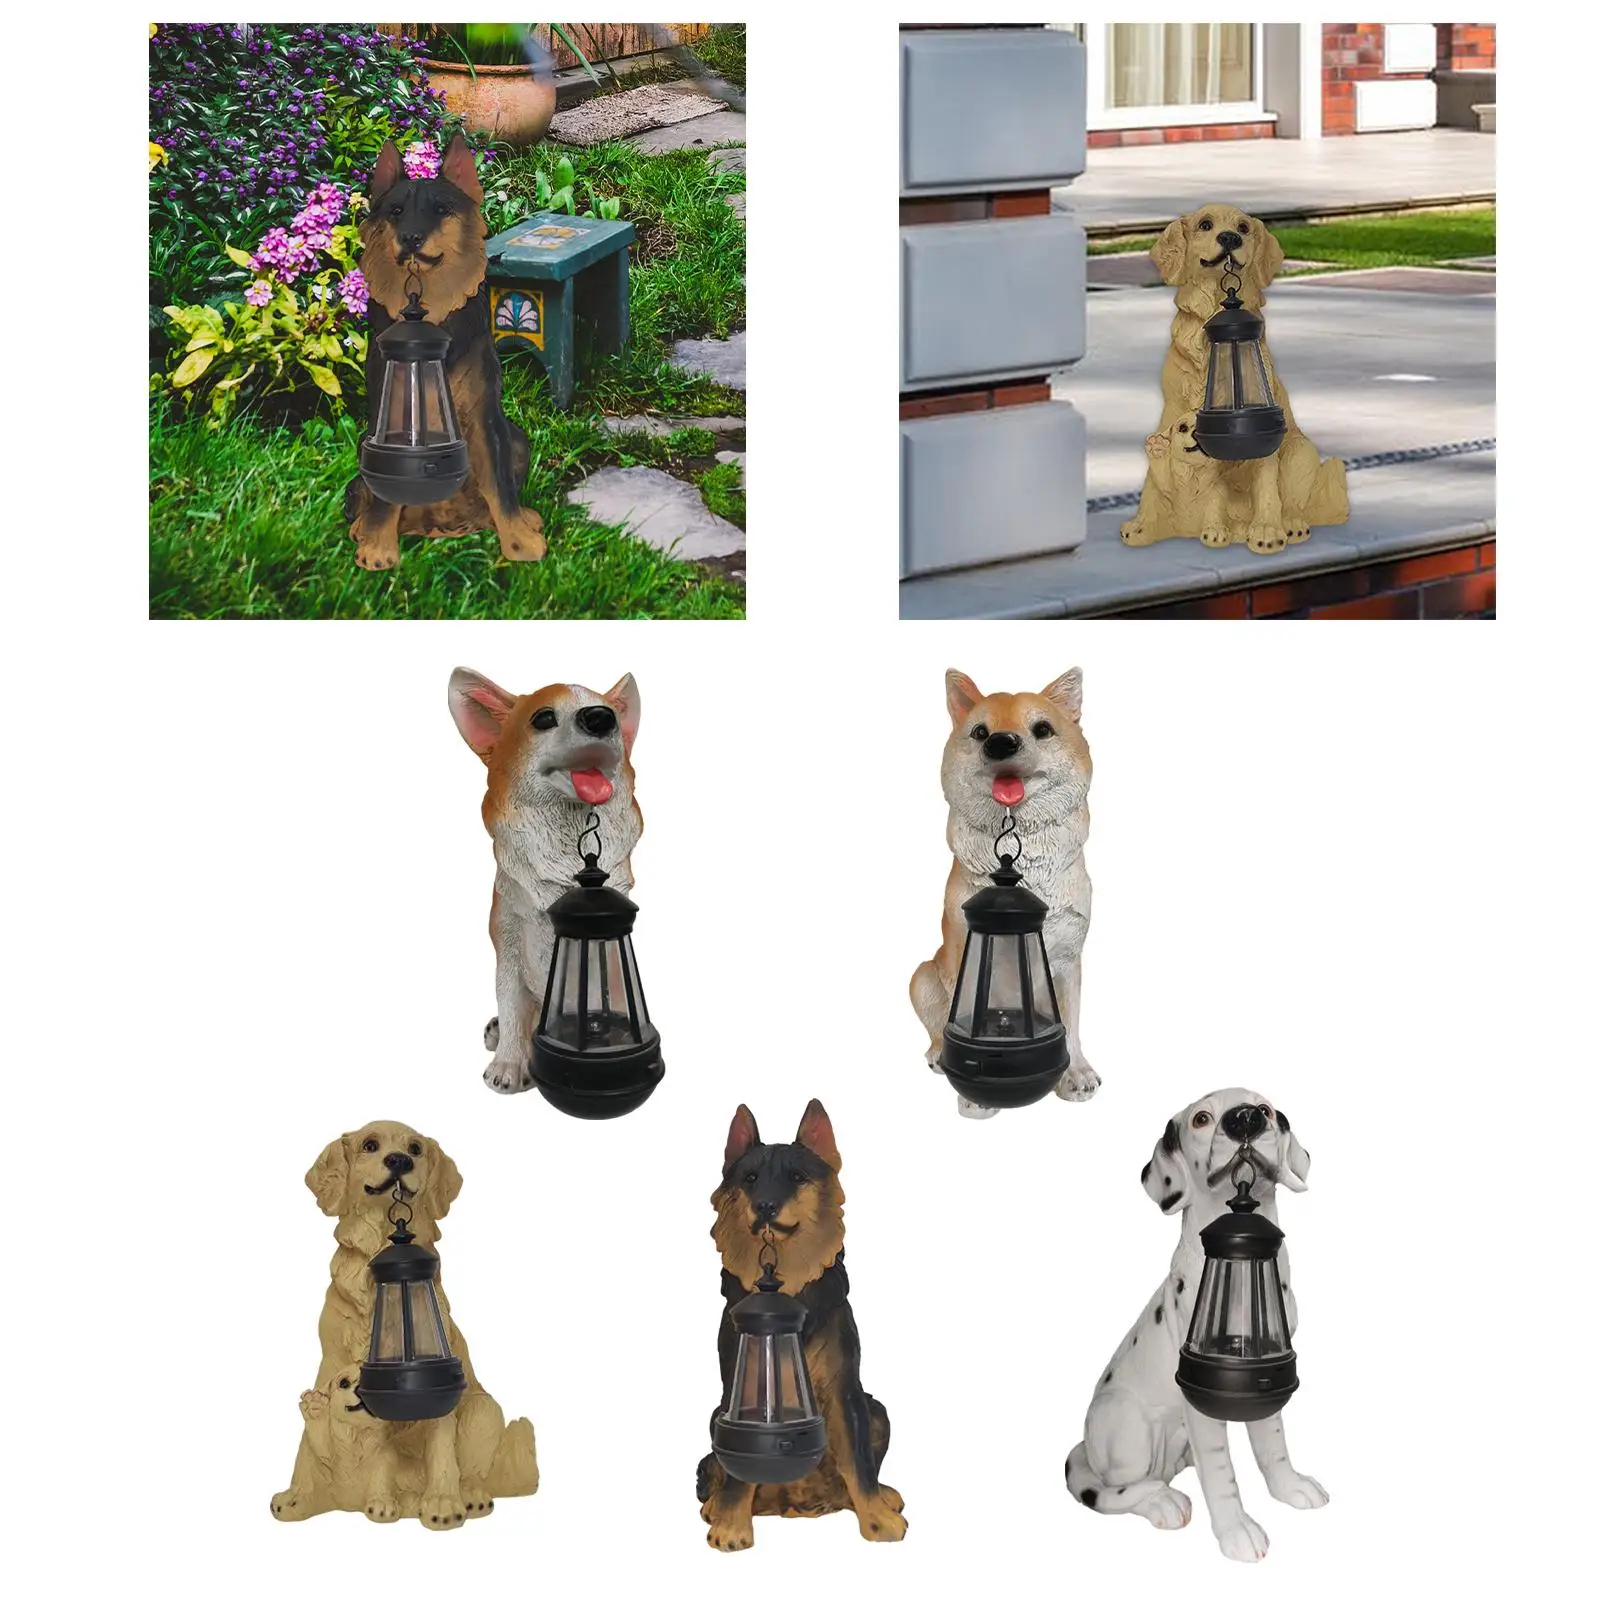 Hand Painted Resin Figurine Hanging Lantern Animal Sculptures Lamp Garden Dogs Statue with Solar Lights for Farmhouse Backyard